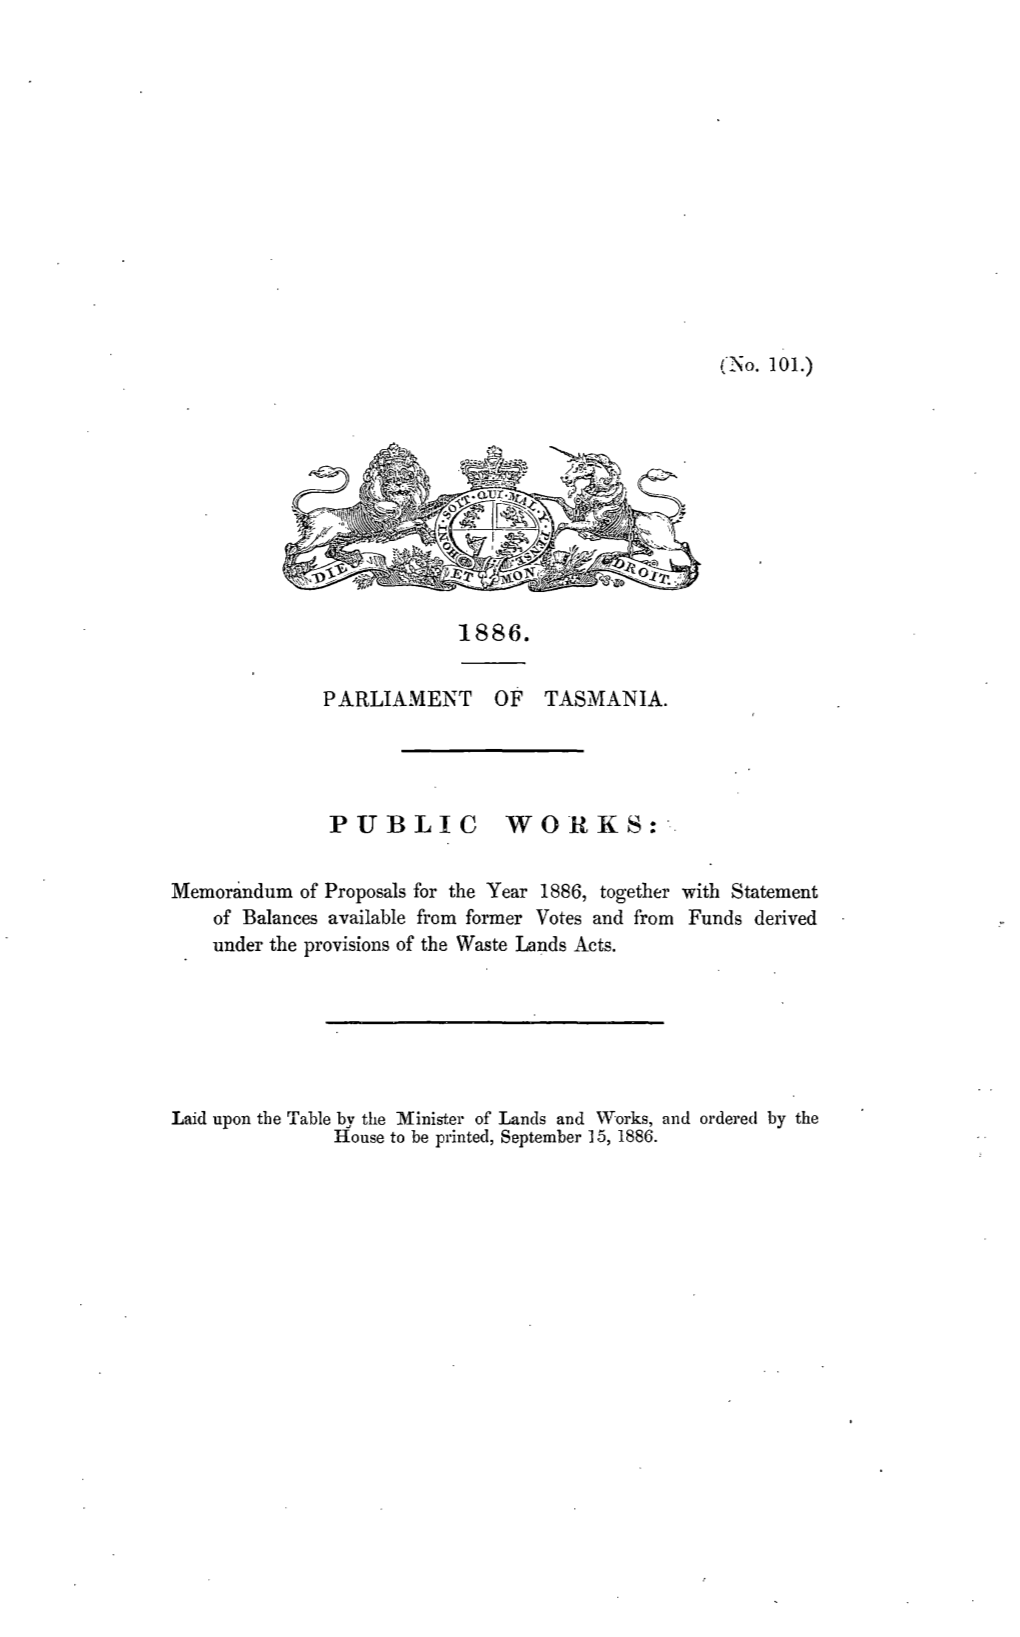 Public Works: Memorandum of Proposals for the Year 1886, Together with Statement of Balances Available from Former Votes And